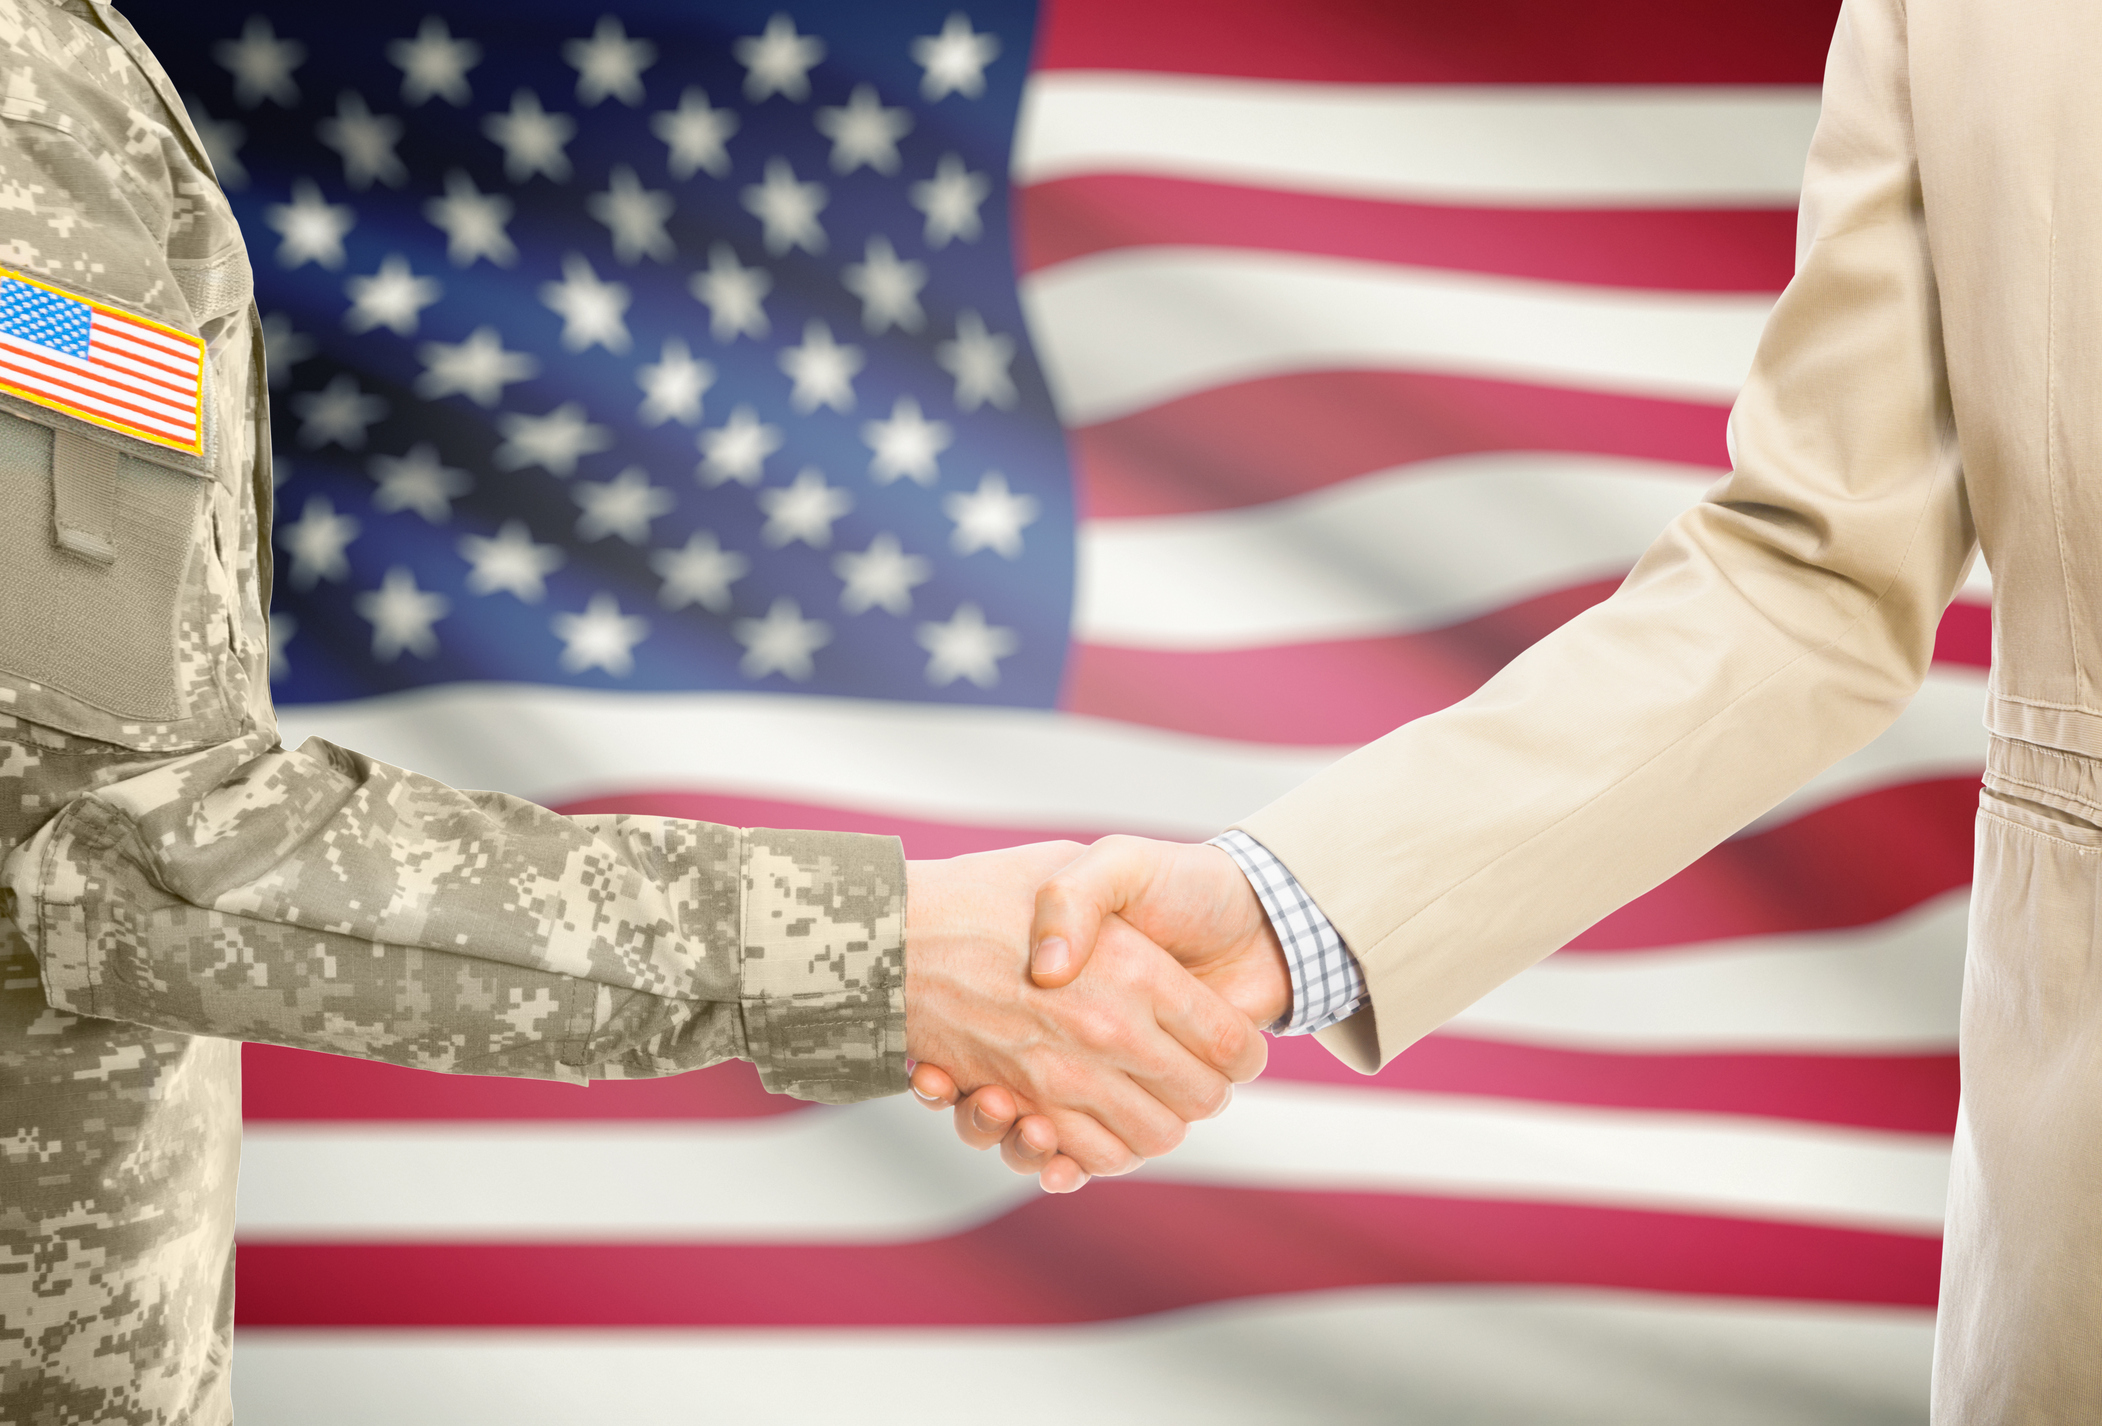 USA military man in uniform and civil man in suit shaking hands with national flag on background - United States